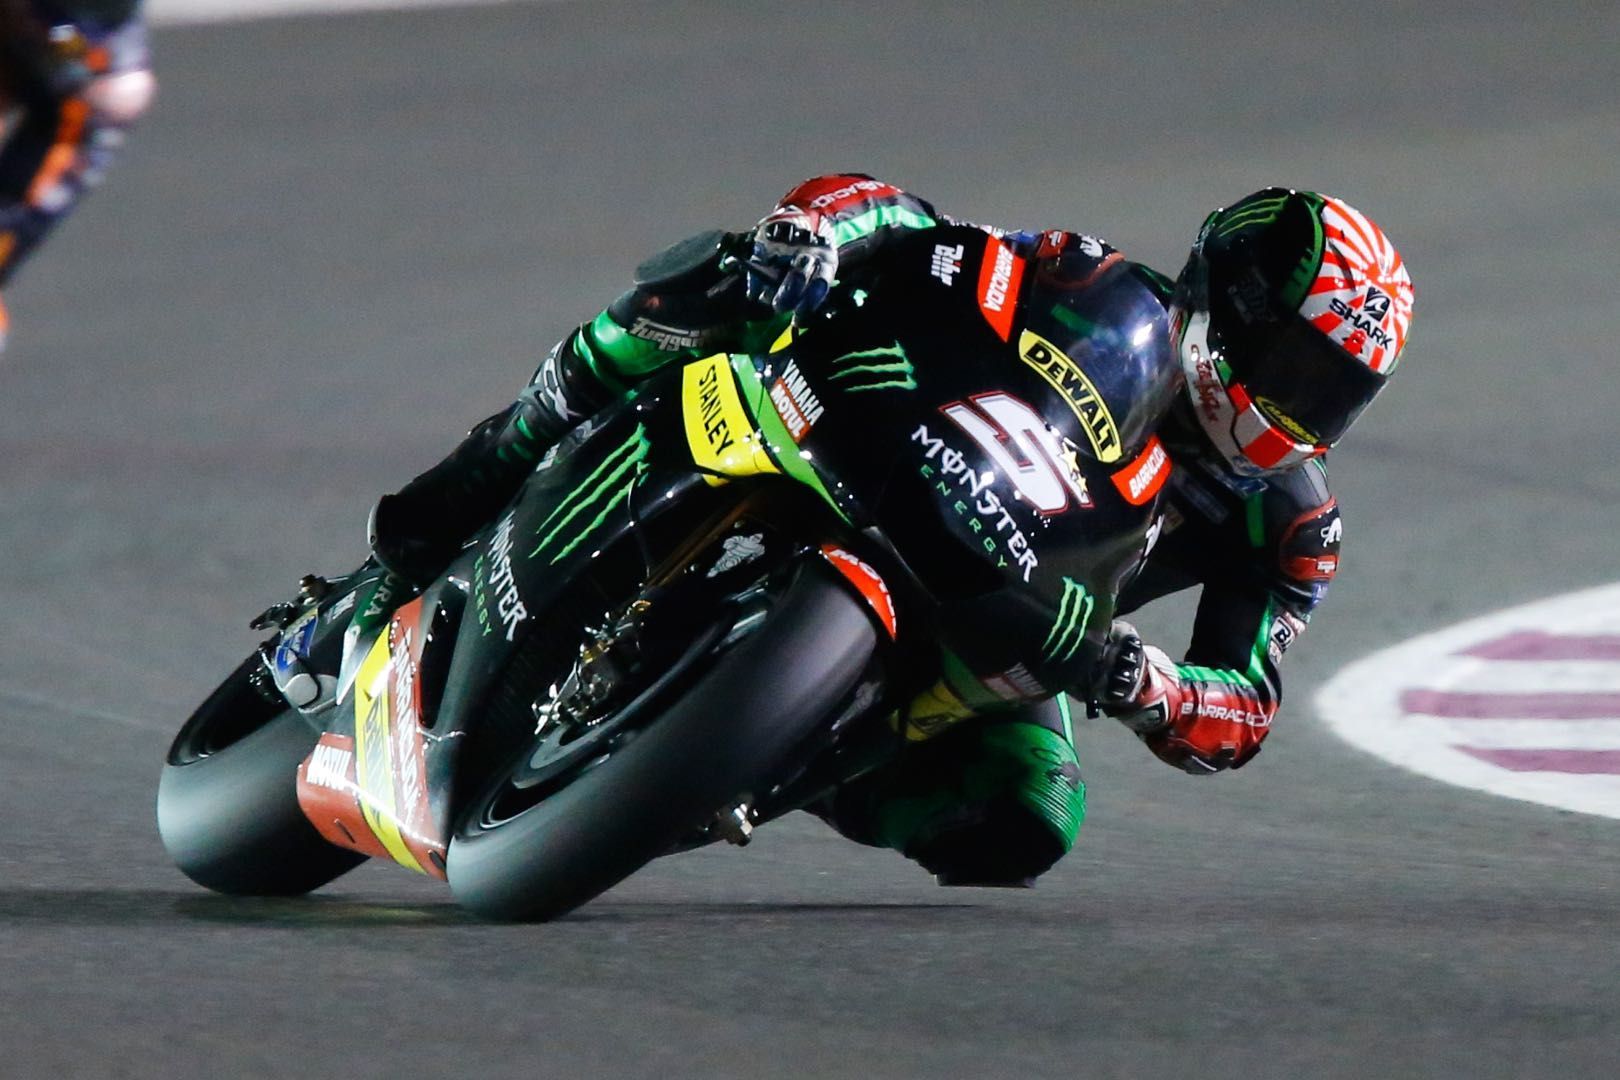 Johann Zarco may have ruined his MotoGP debut but did prove himself to be competitive